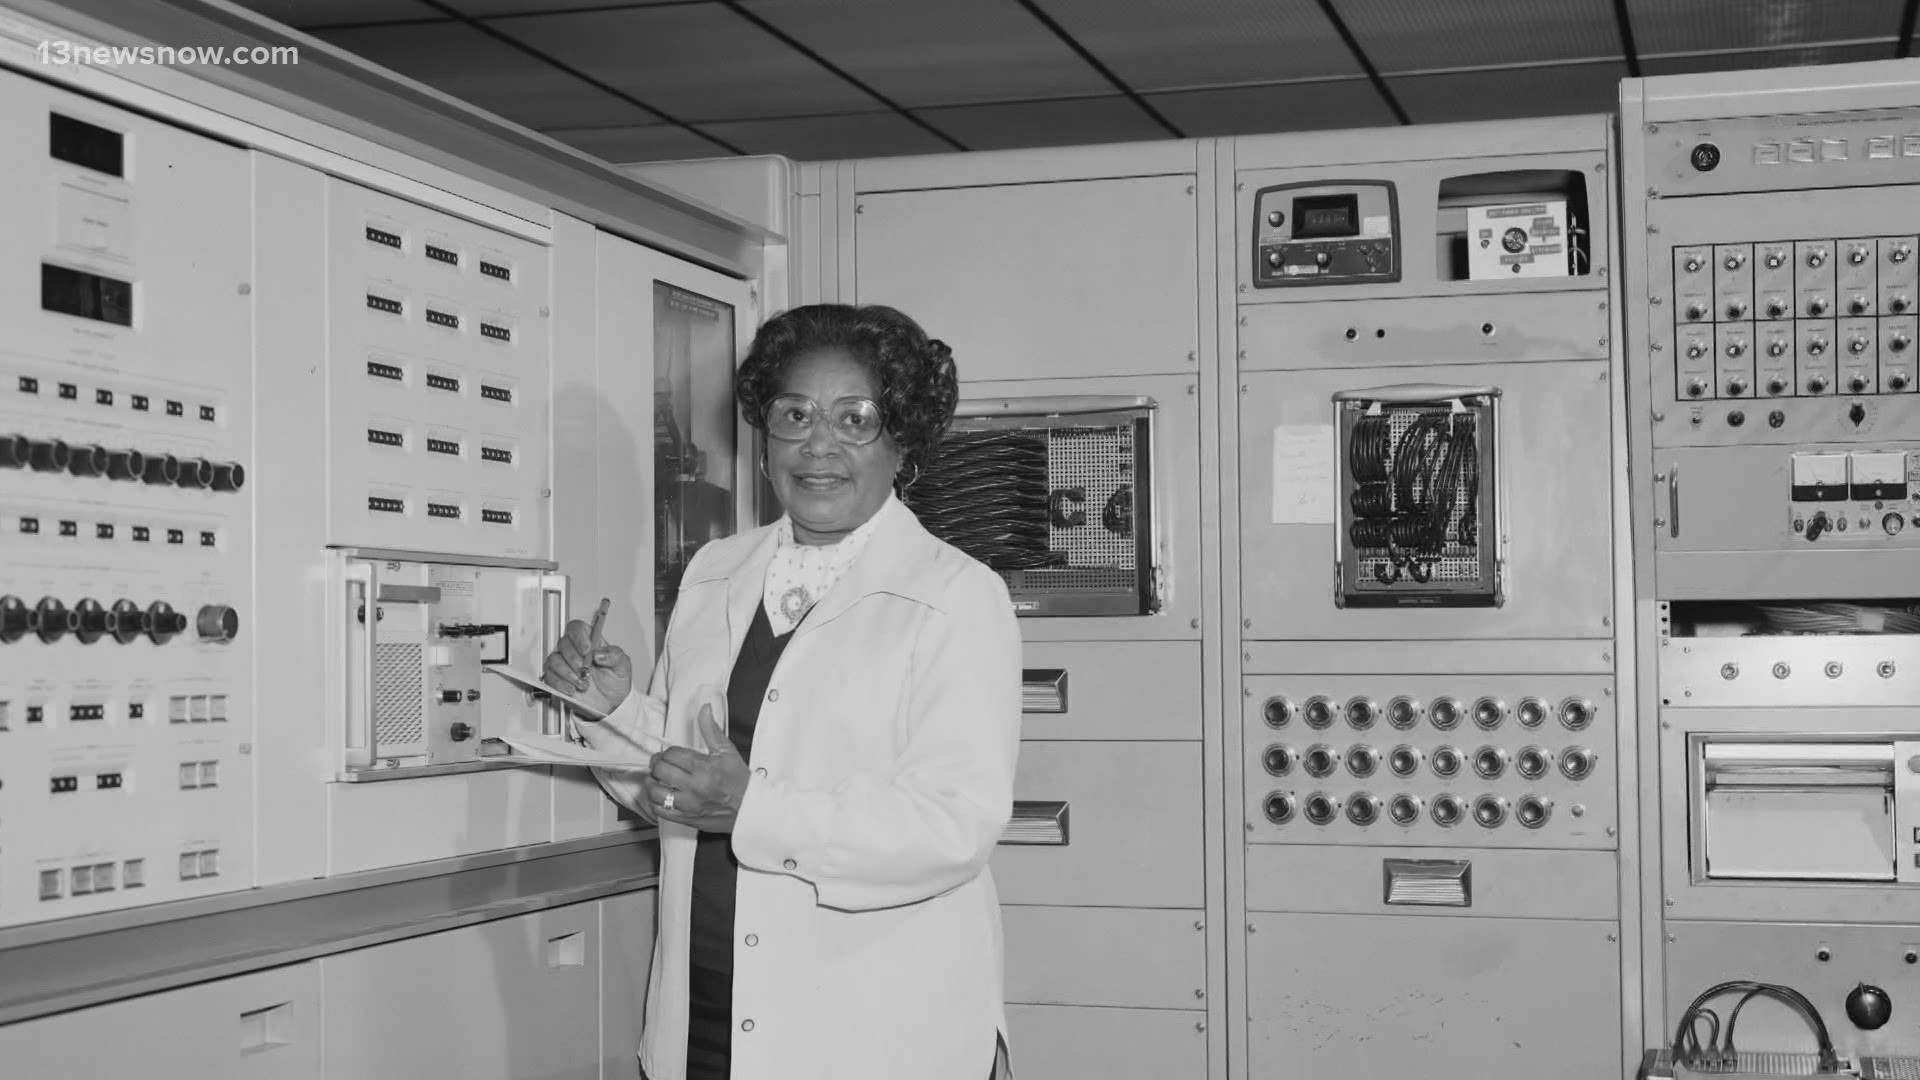 Jackson was the first African American engineer to work at NASA and was featured in the film "Hidden Figures." [Center renderings by Work Program Architects (WPA)]